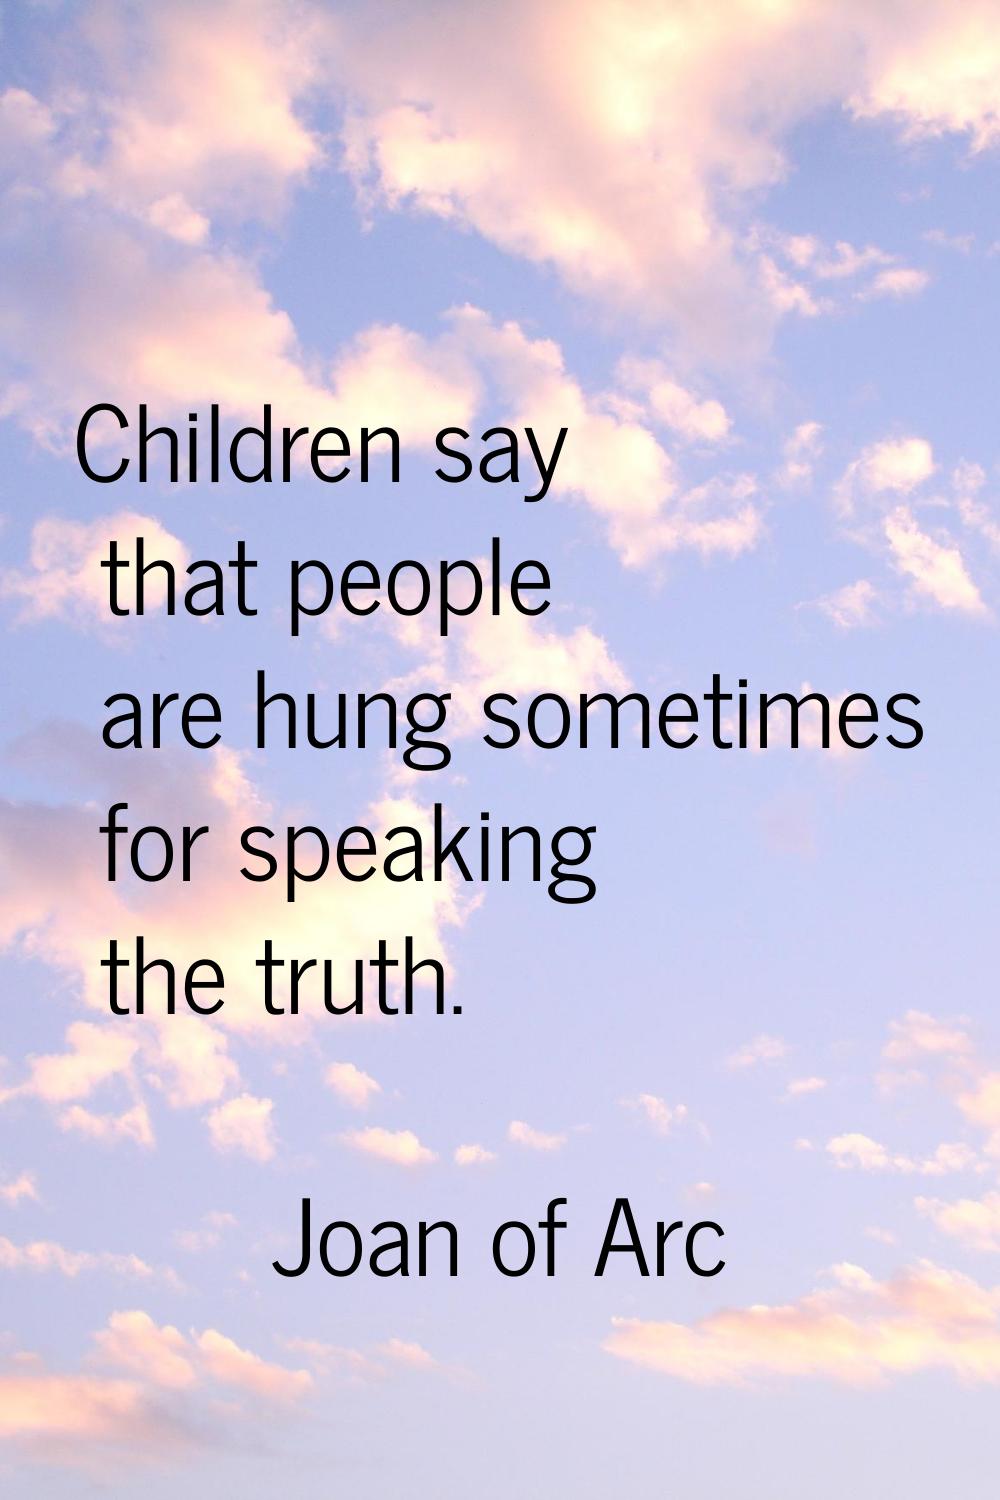 Children say that people are hung sometimes for speaking the truth.